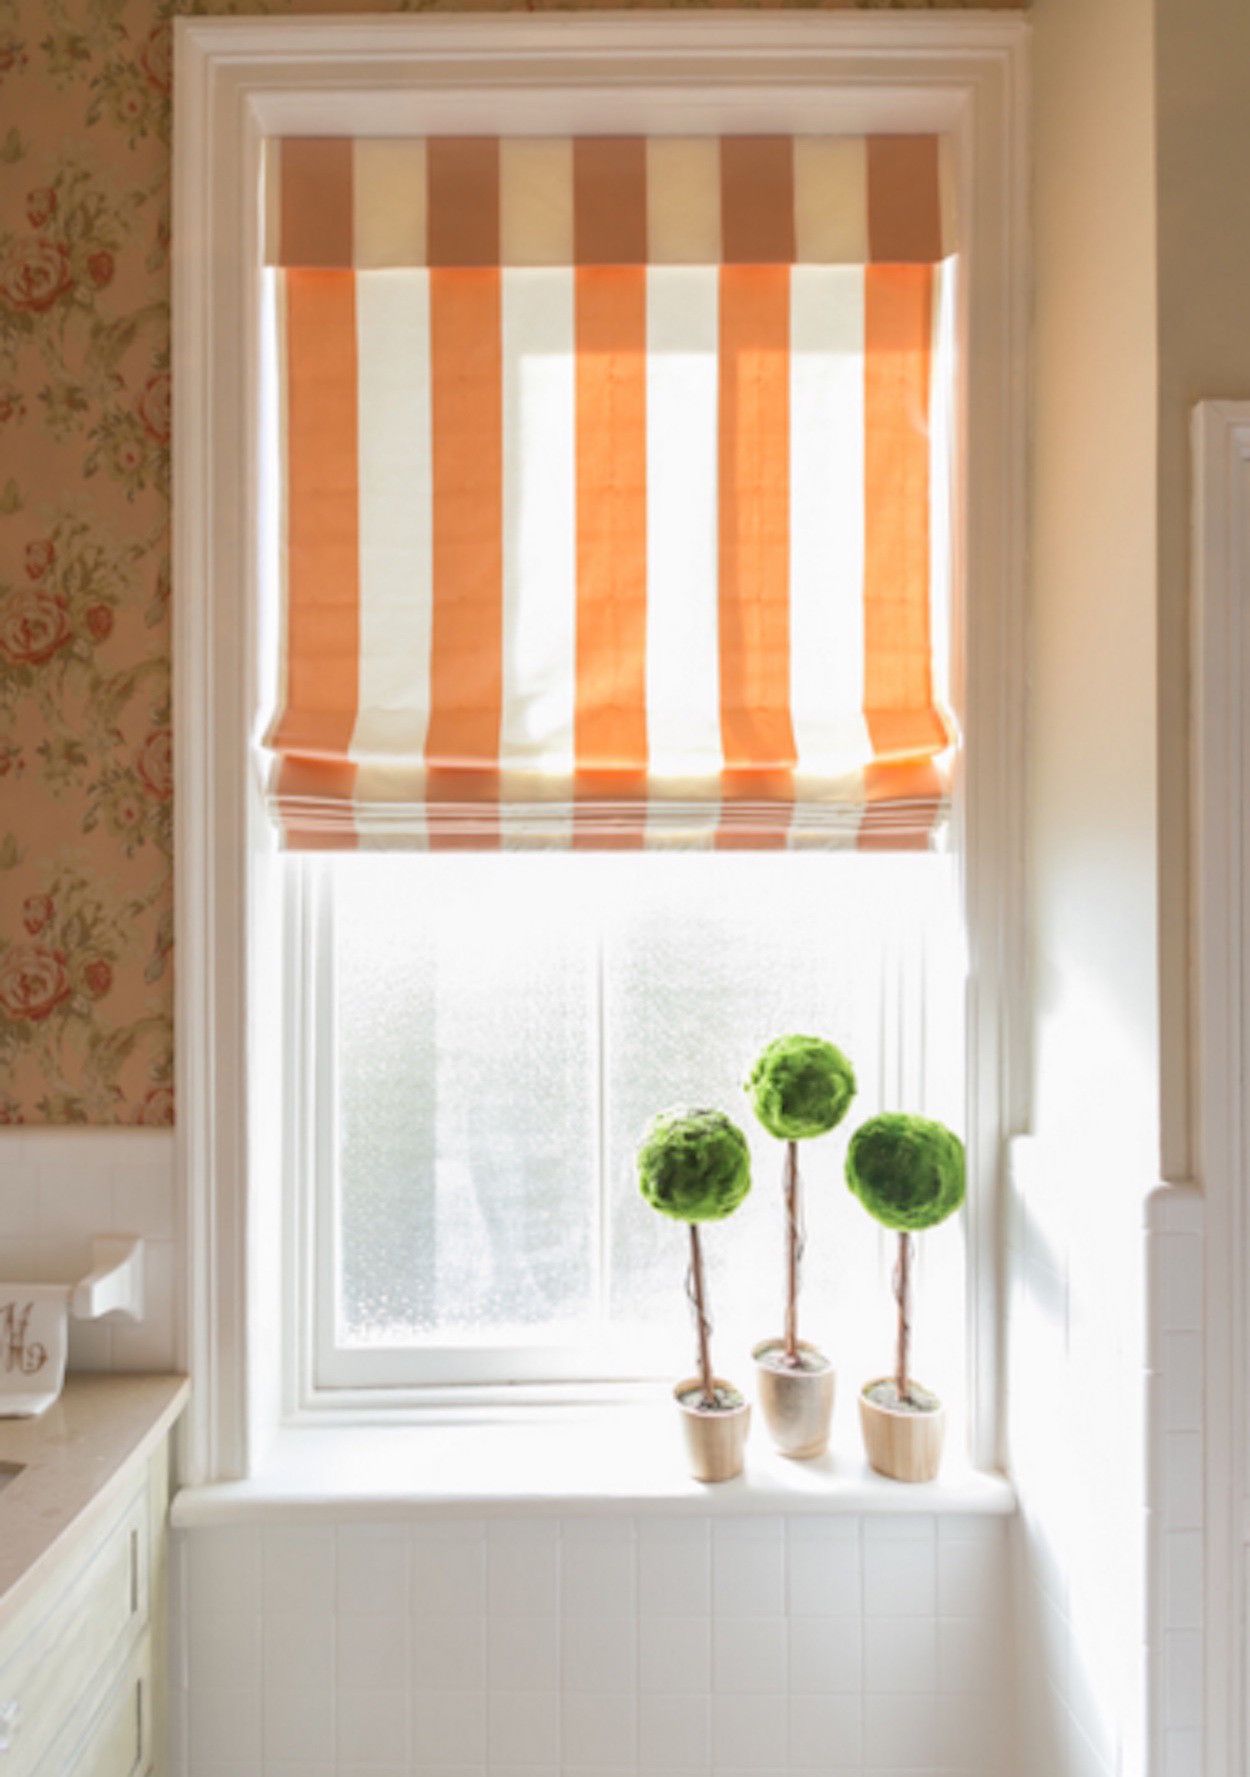 Bathroom Curtains: Adding Style and Privacy to Your Bathroom